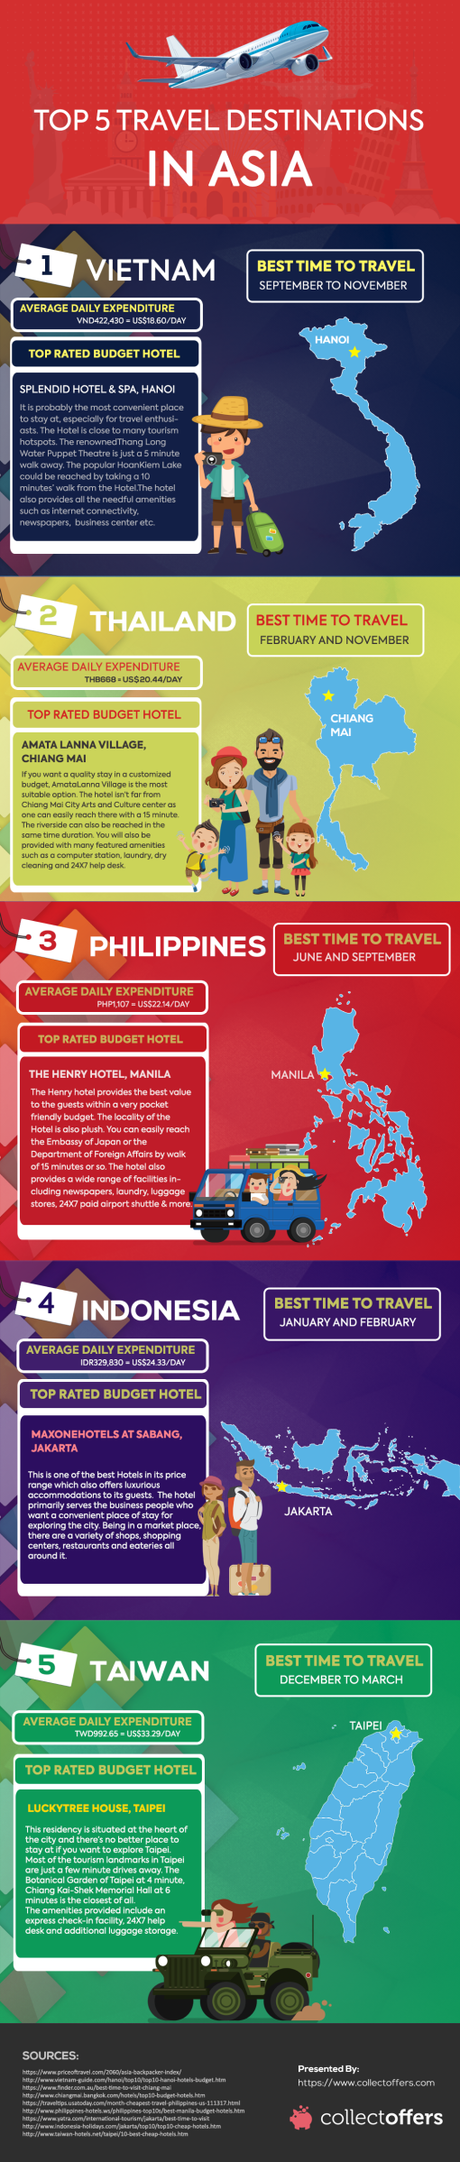 Top 5 Budget-Friendly Travel Destinations In Asia!